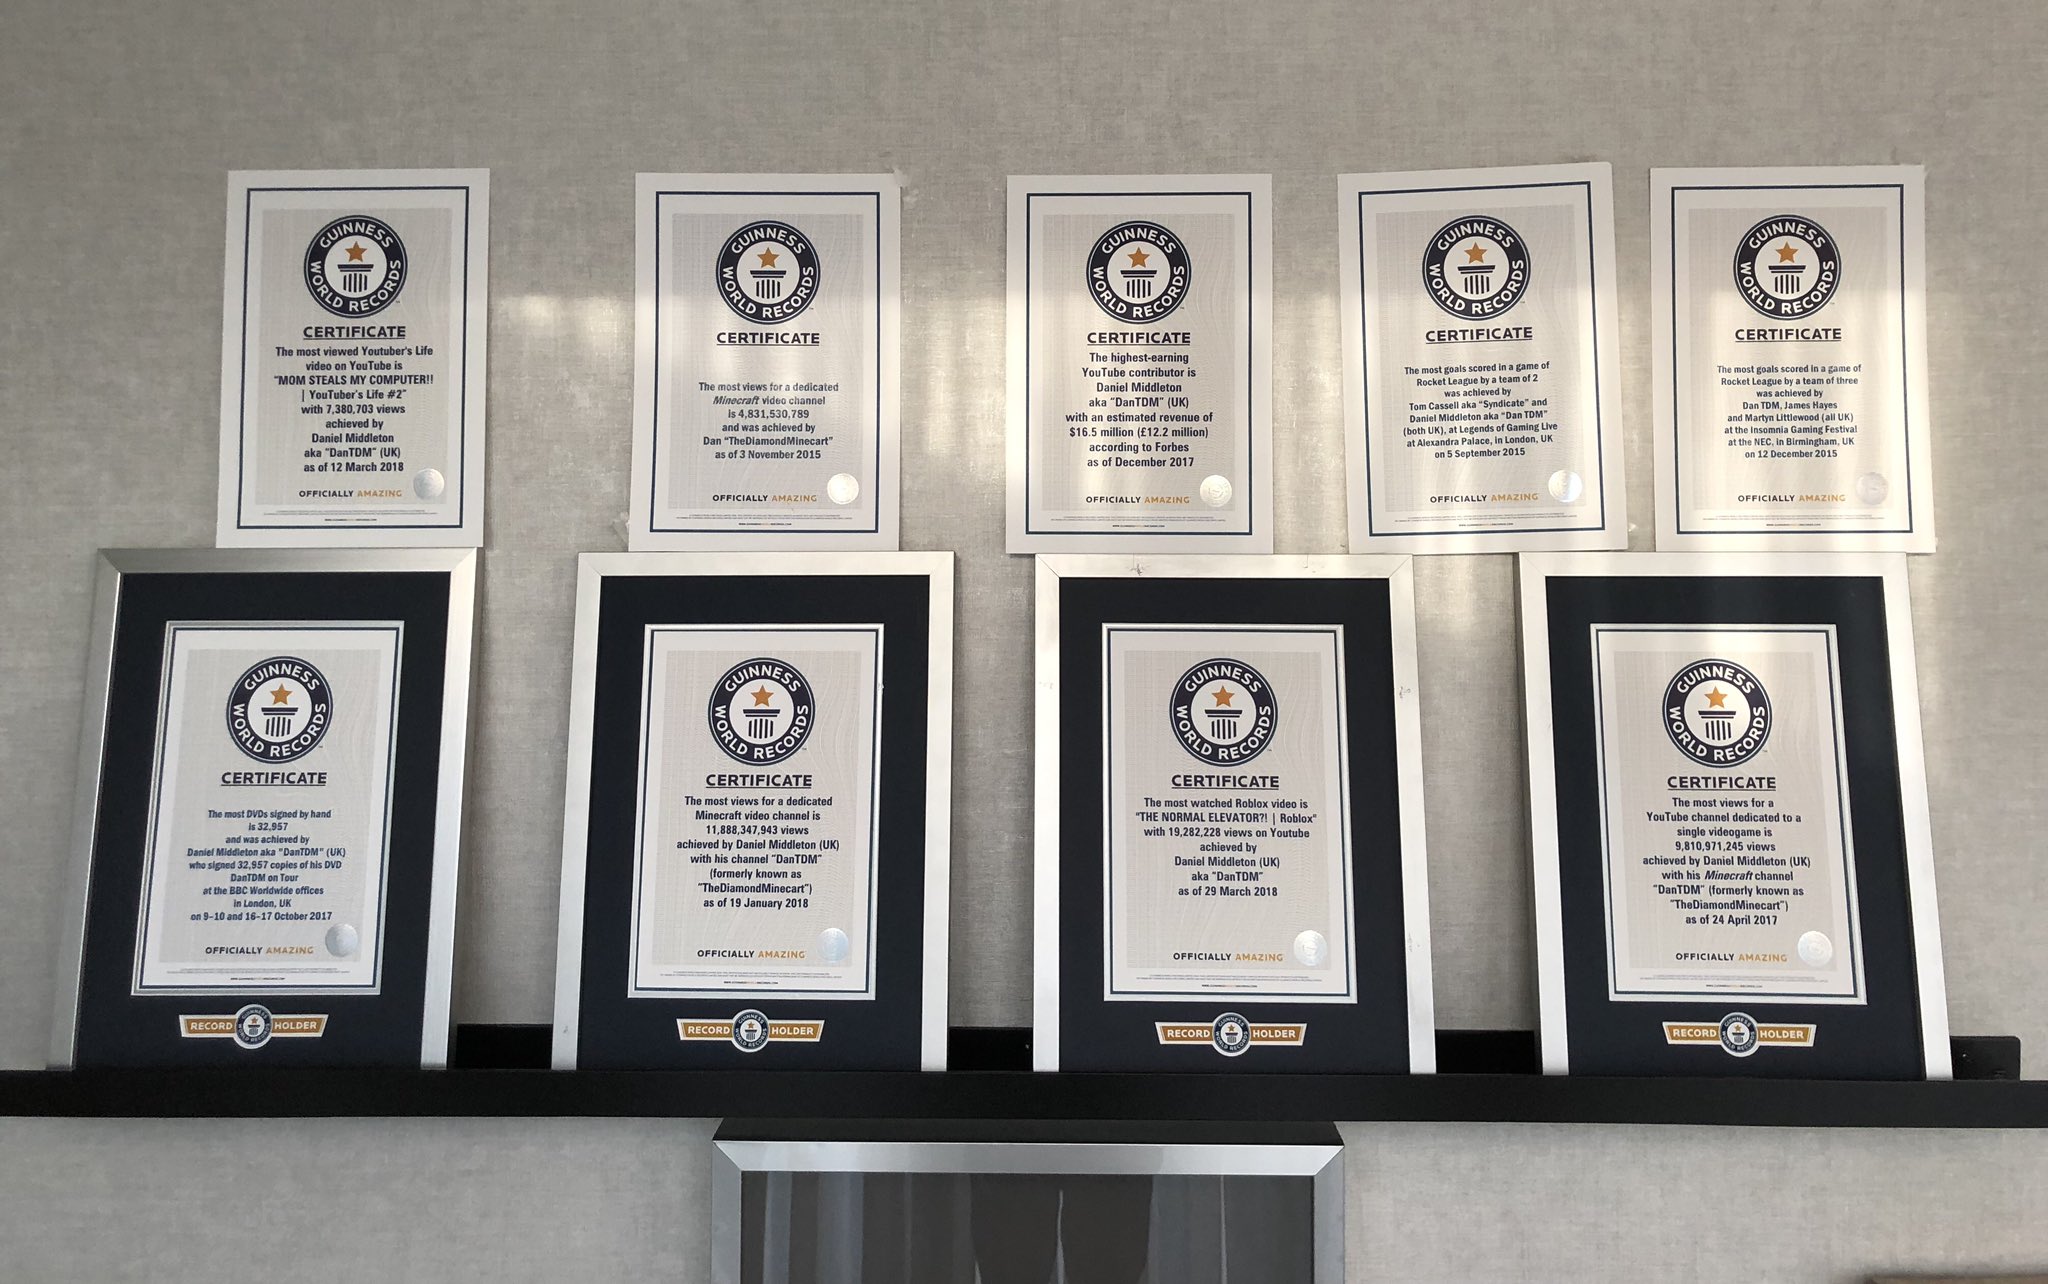 ᴅᴀɴᴛᴅᴍ On Twitter Here Comes A Weird Flex But Okay Got Delivery Of 5 New Guinness World Records Today I Now Have 9 That S Insane Https T Co Uogehmvtl7 - dantdms roblox account 2018